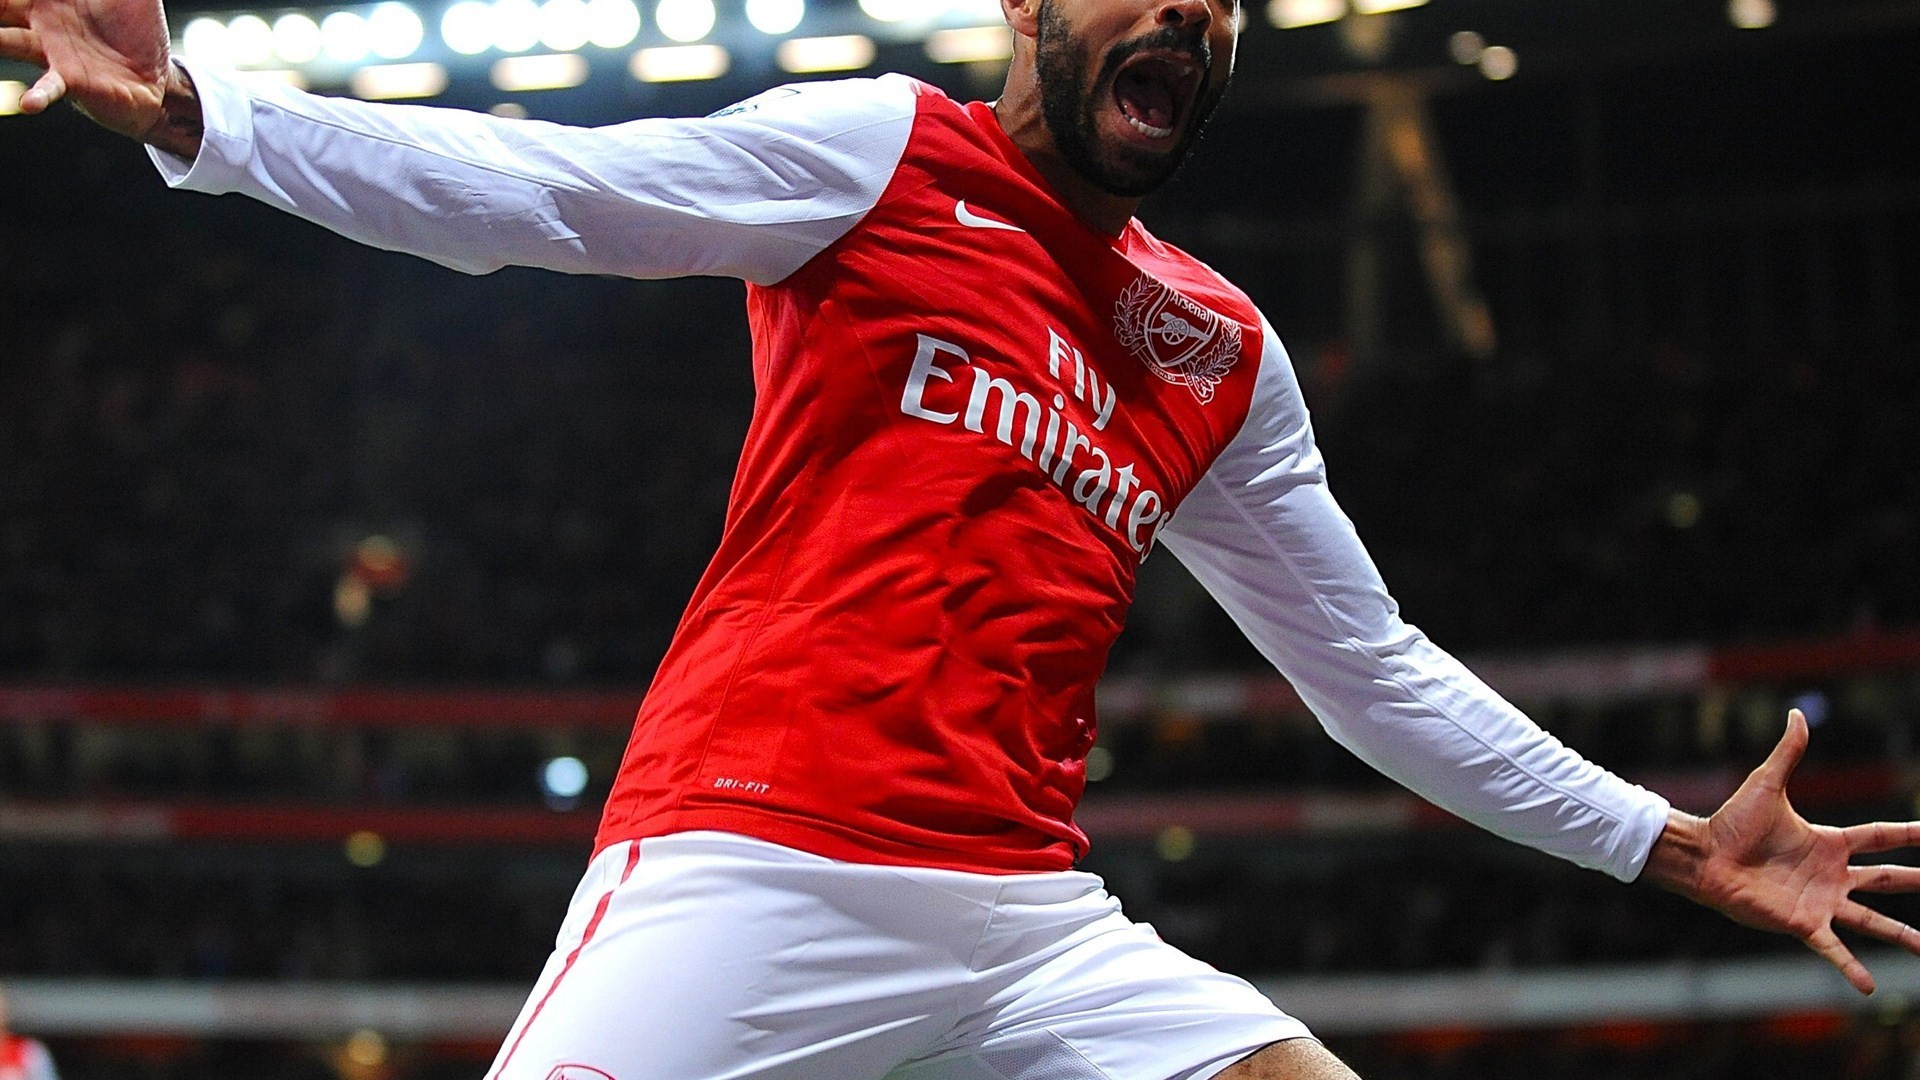 Arsenal London, Thierry Henry Wallpaper